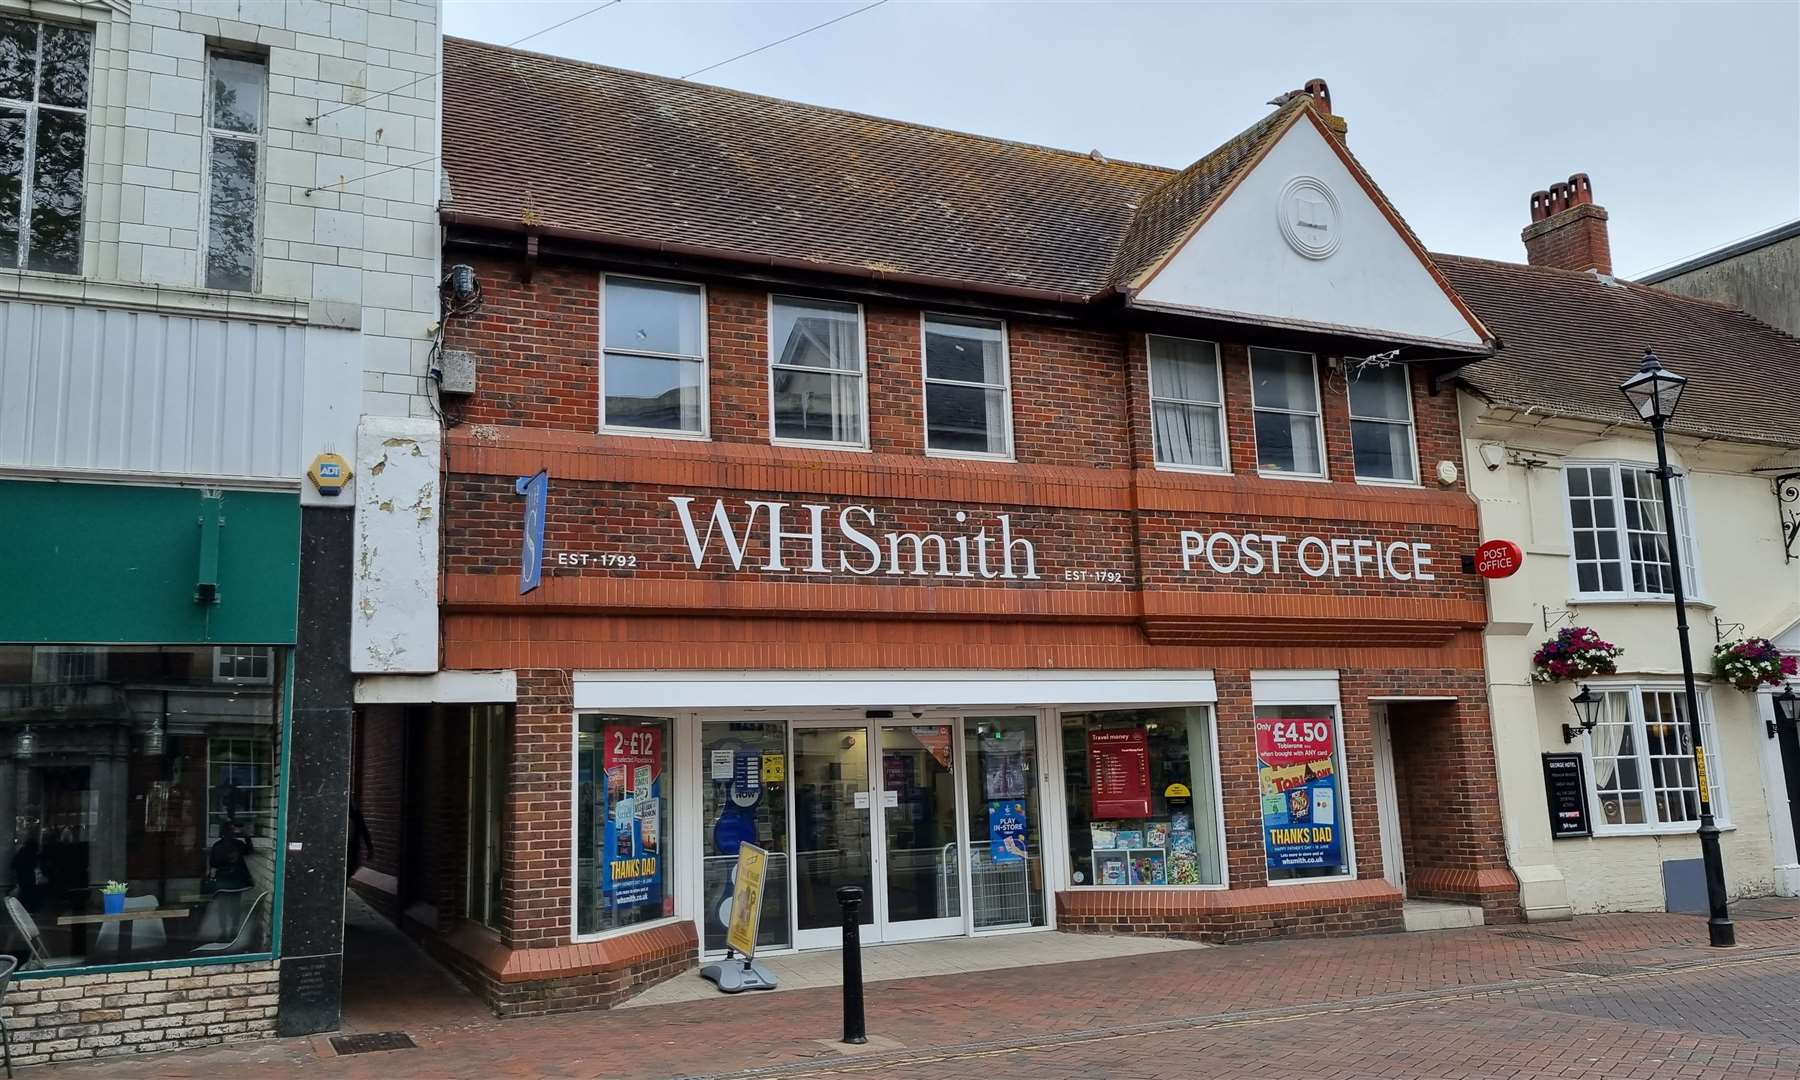 Plans to build six apartments and an extra floor above WHSmith in Ashford have been put forward